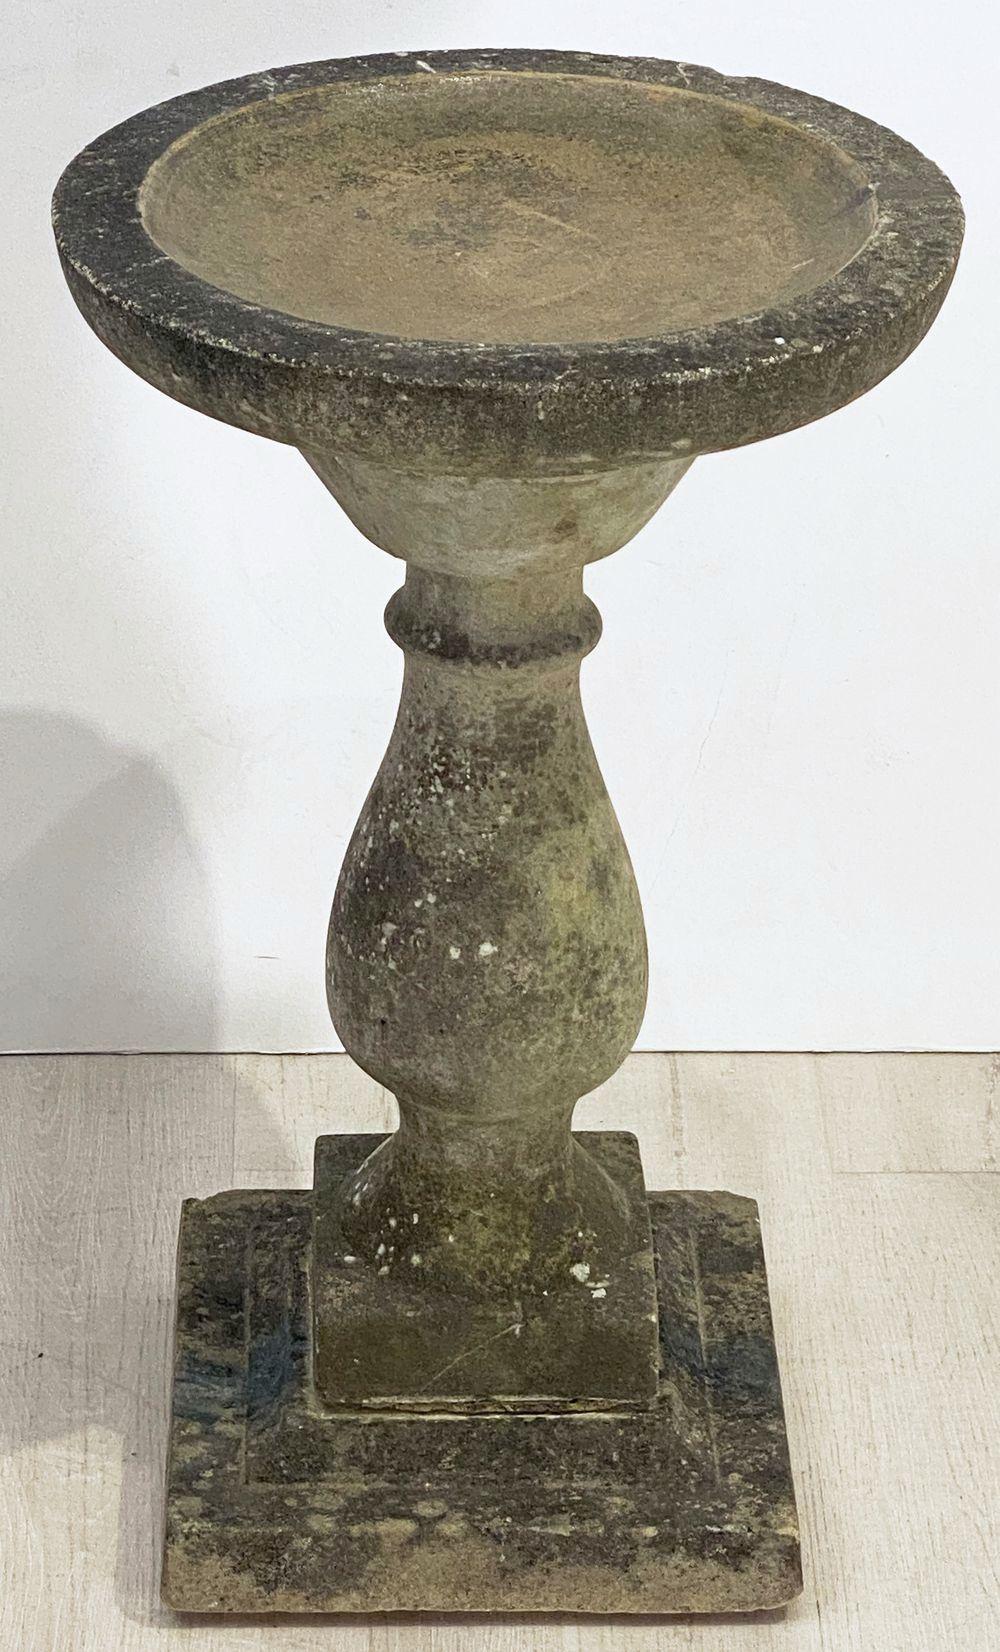 A handsome English bird bath (or birdbath) of composition stone, featuring a 17 1/2 inch diameter basin top (circular) set upon a Classical baluster pedestal column and raised square plinth base.

Basin depth is approximately 1 1/4 inches.

Perfect